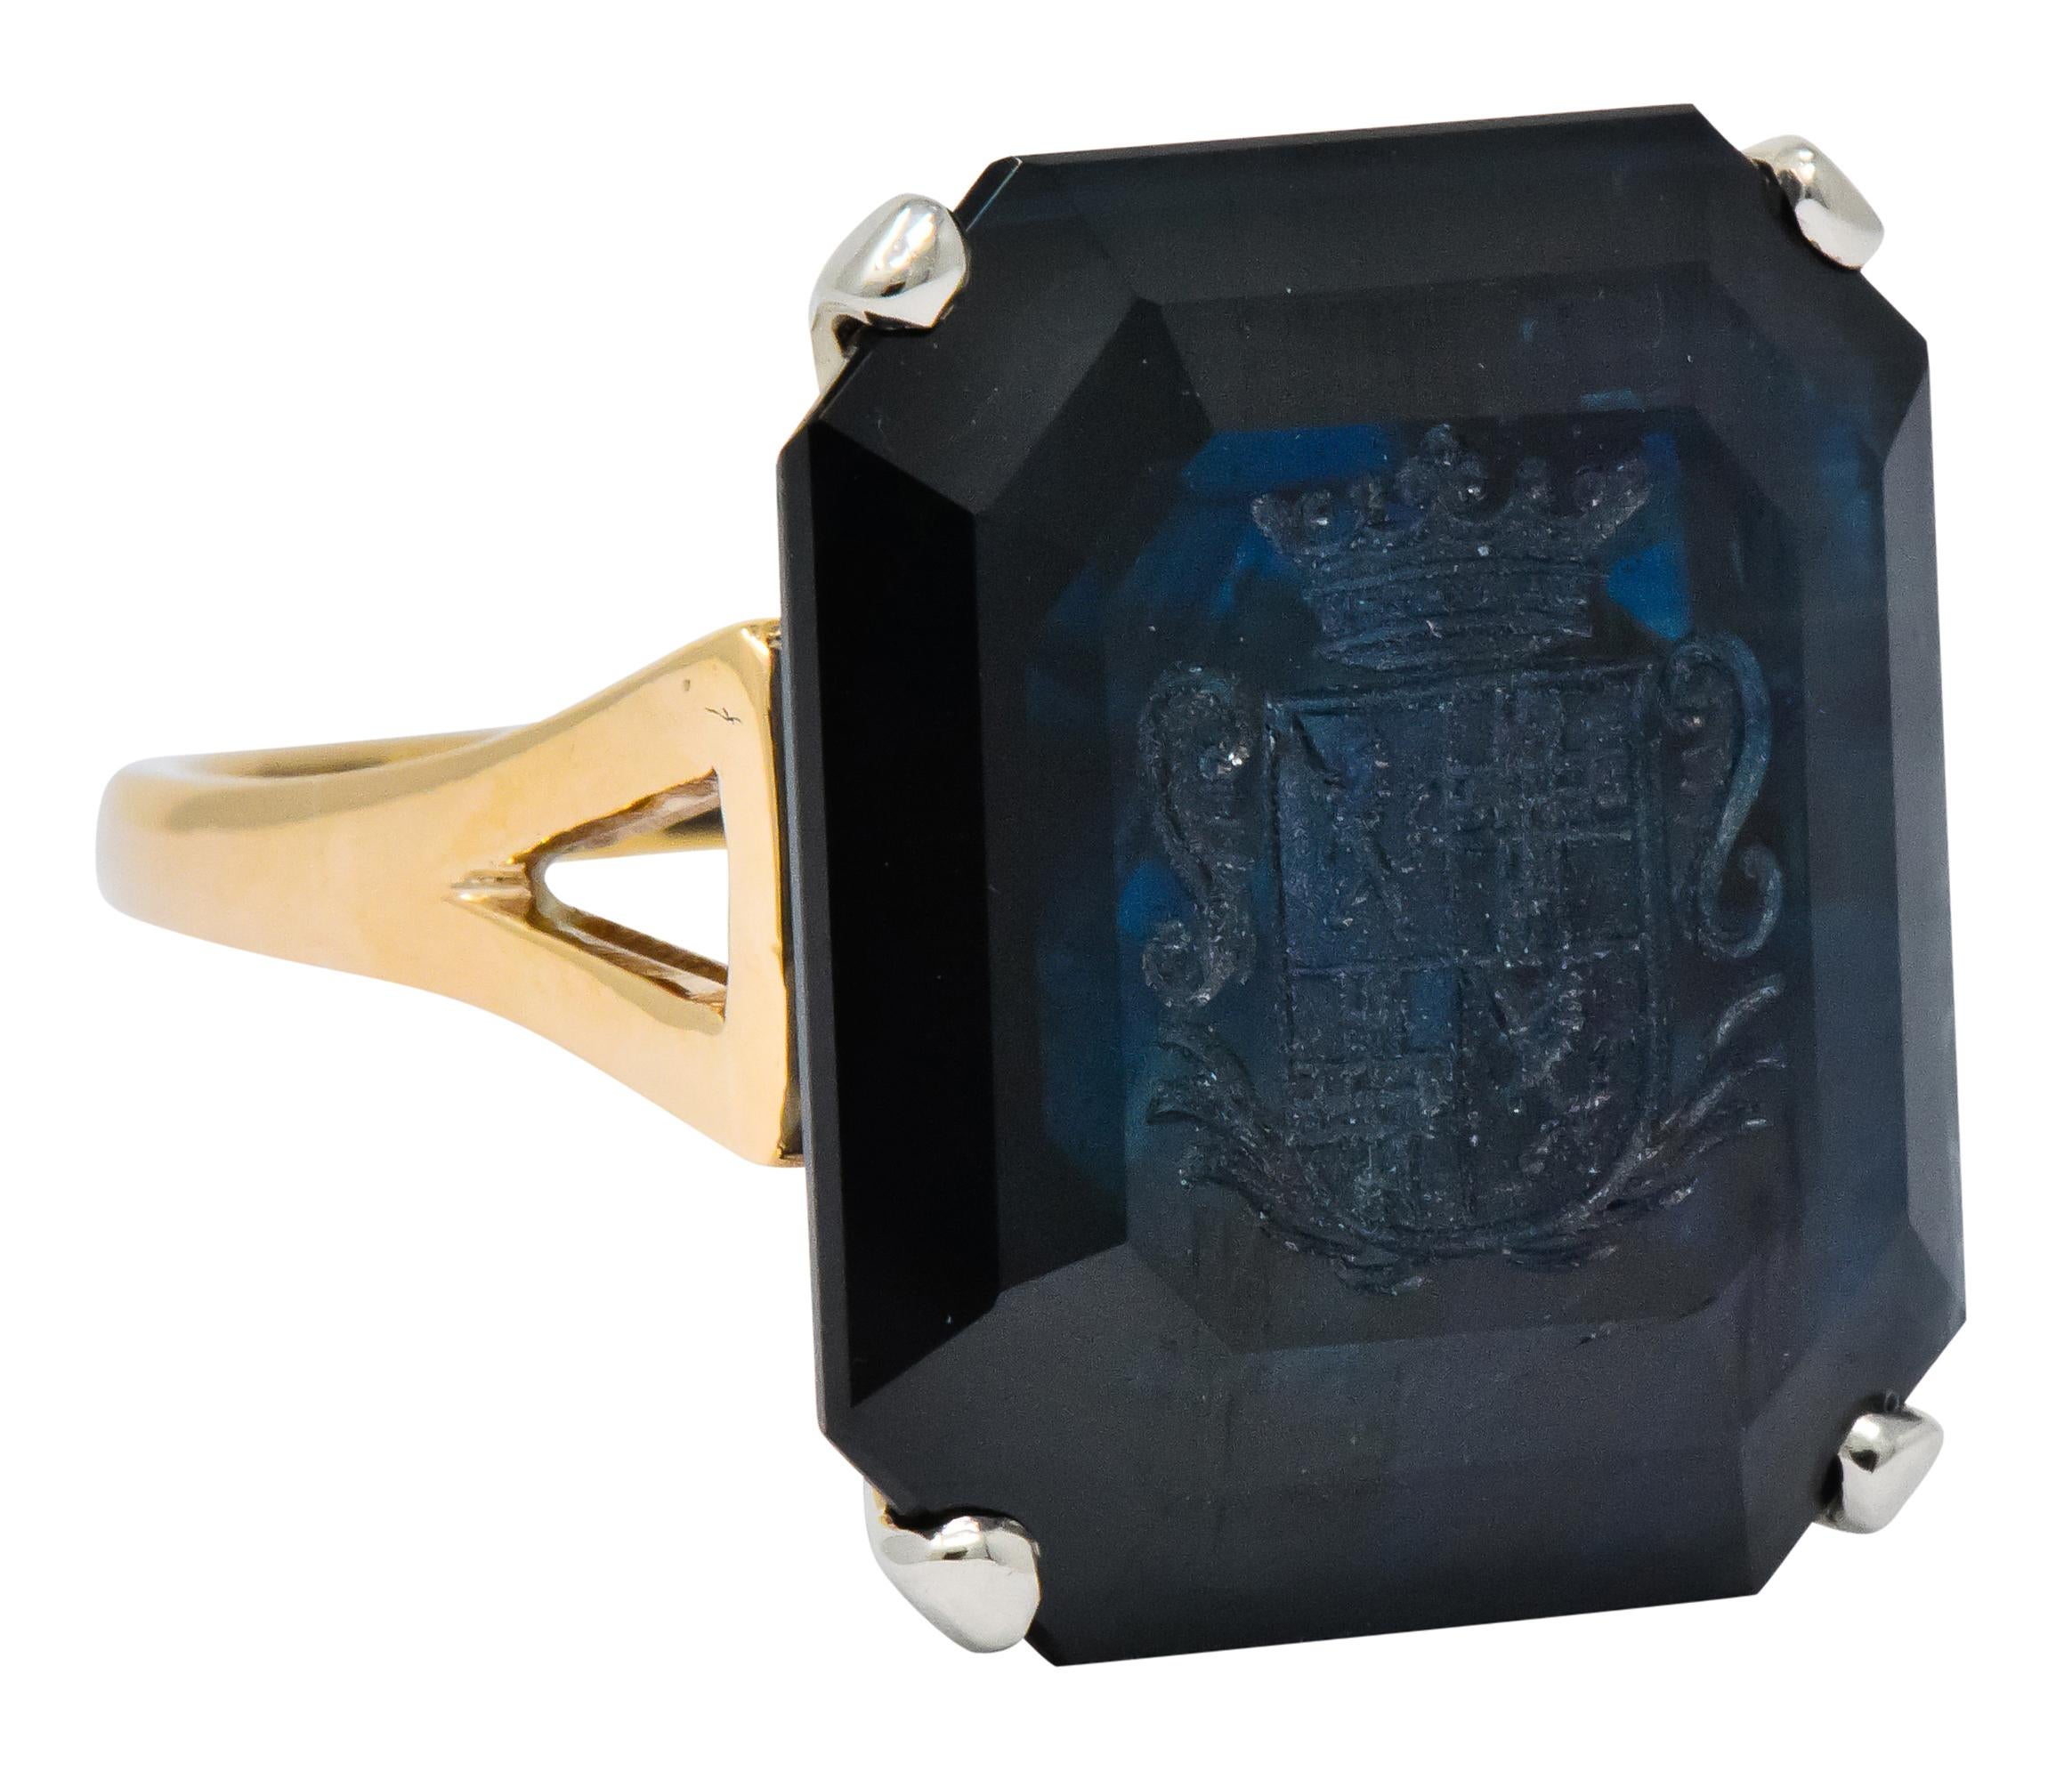 Centering an octagonal intaglio cut sapphire weighing 23.88 carats total, transparent and dark blue in color with no indication of heating

Deeply carved with coat of arms featuring lions, crosses, and scrollwork motif, all topped by a crown

Basket